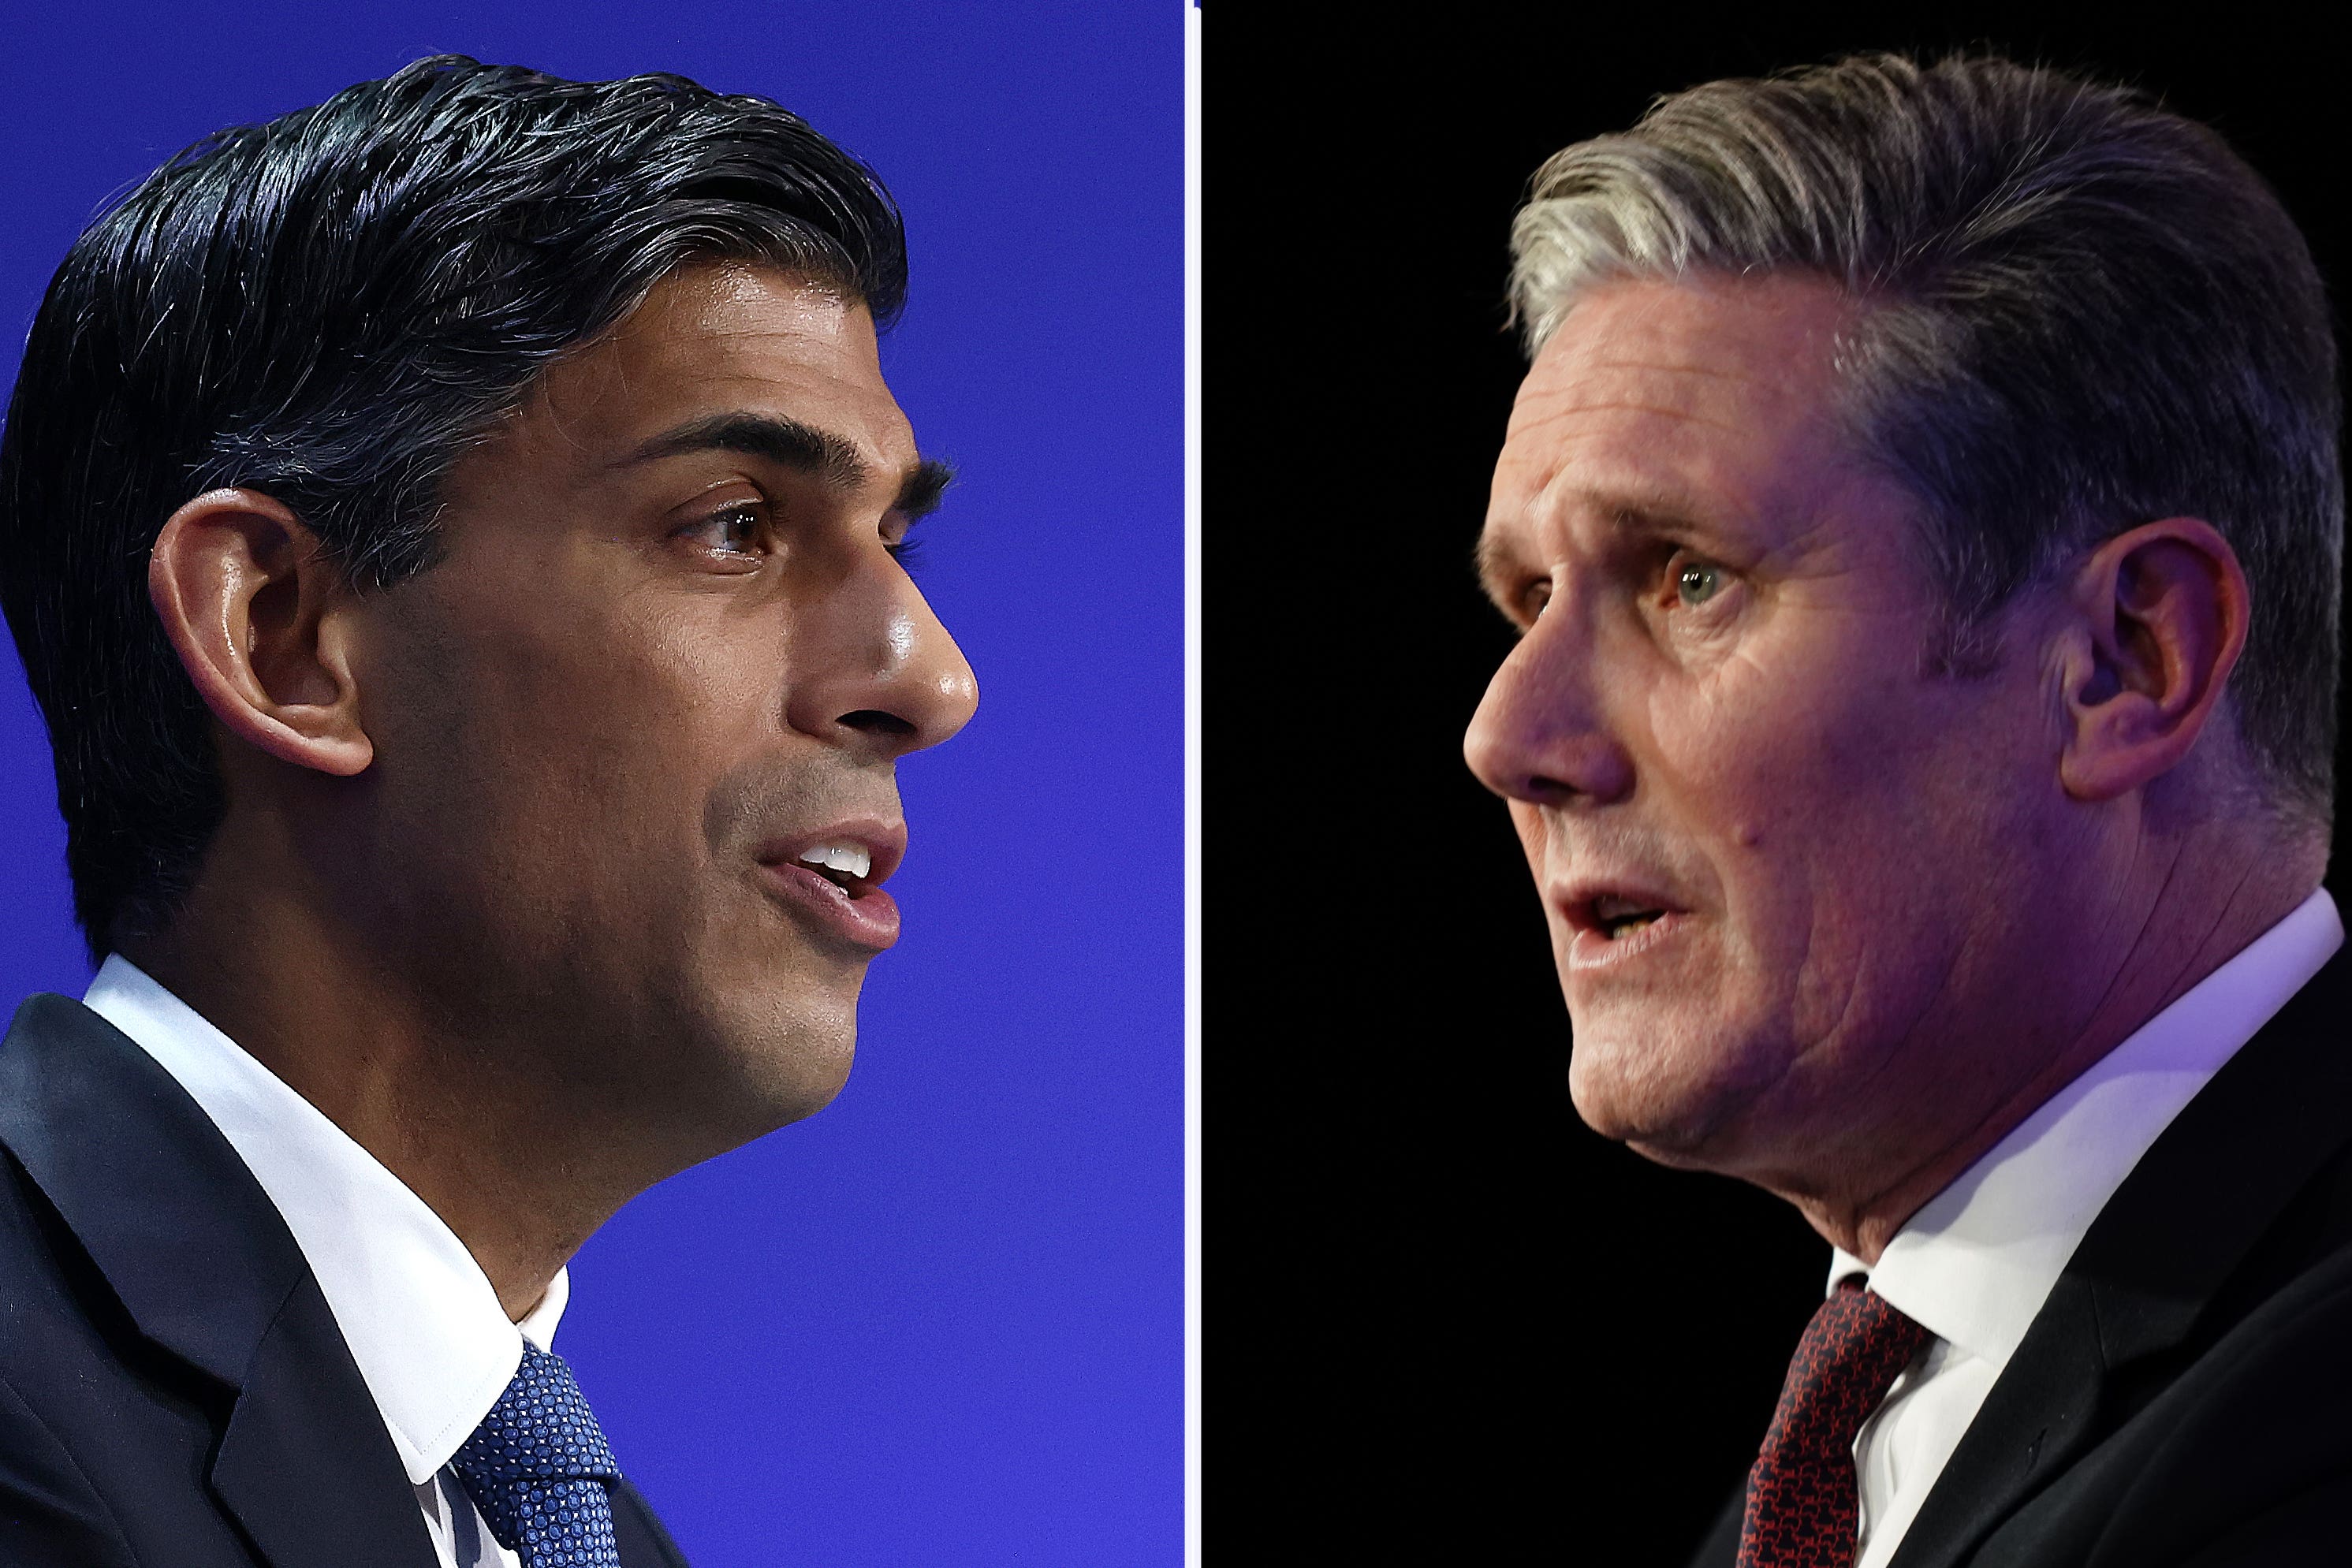 Prime Minister Rishi Sunak and Labour leader Sir Keir Starmer are set to go head to head in a TV debate next week (PA)